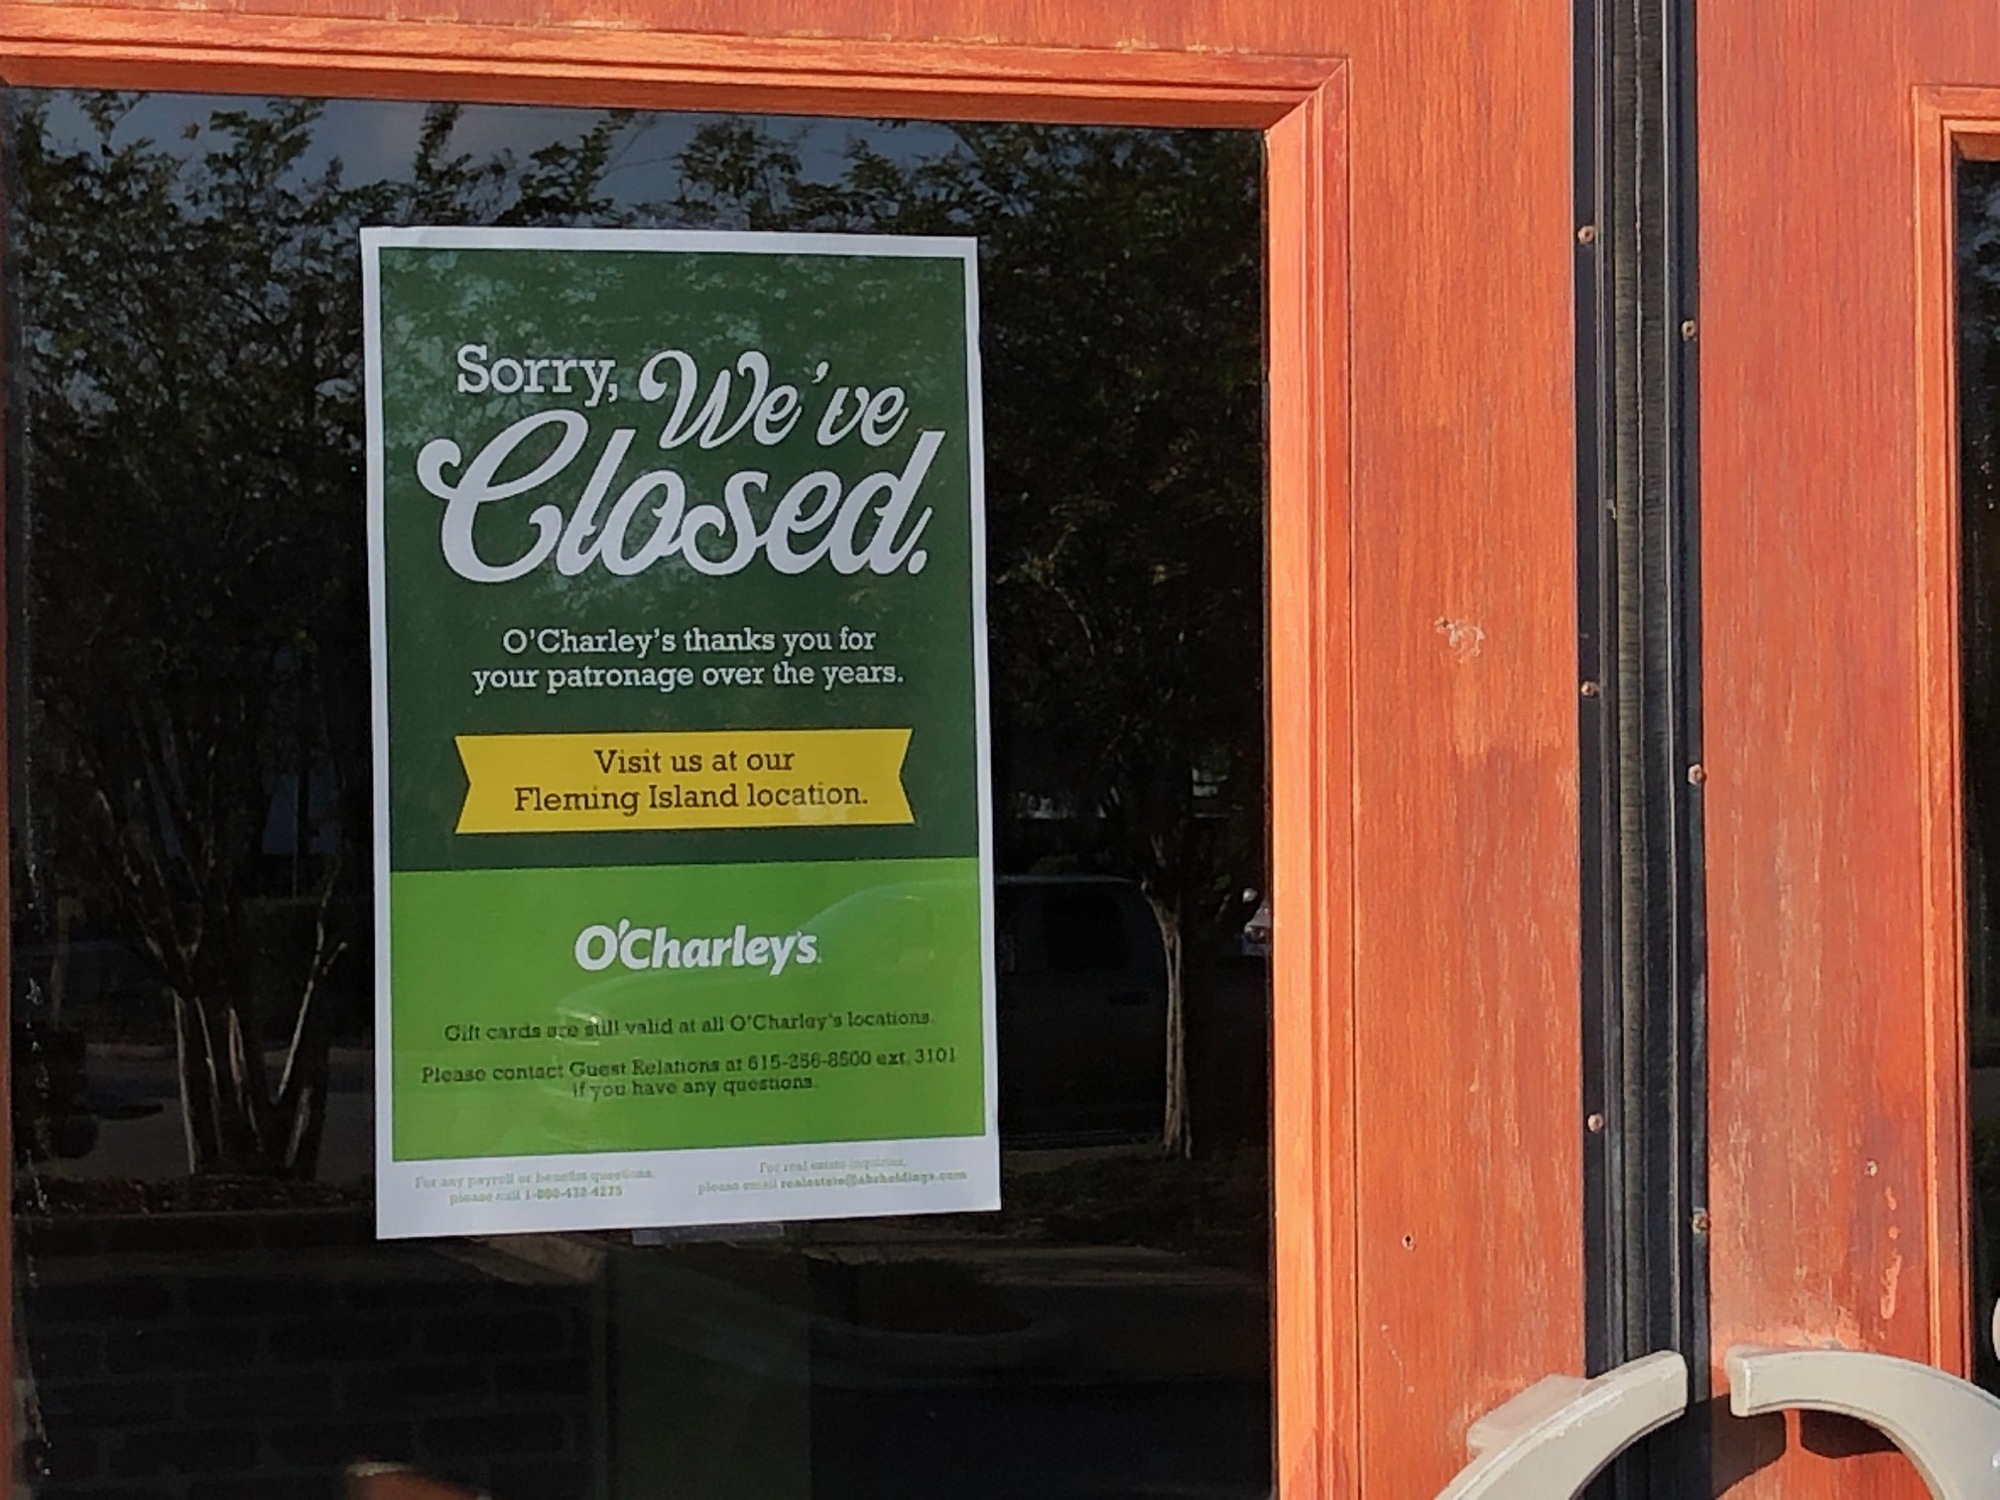 The sign on the door of the Regency O’Charley’s tells customers to visit the Fleming Island location.